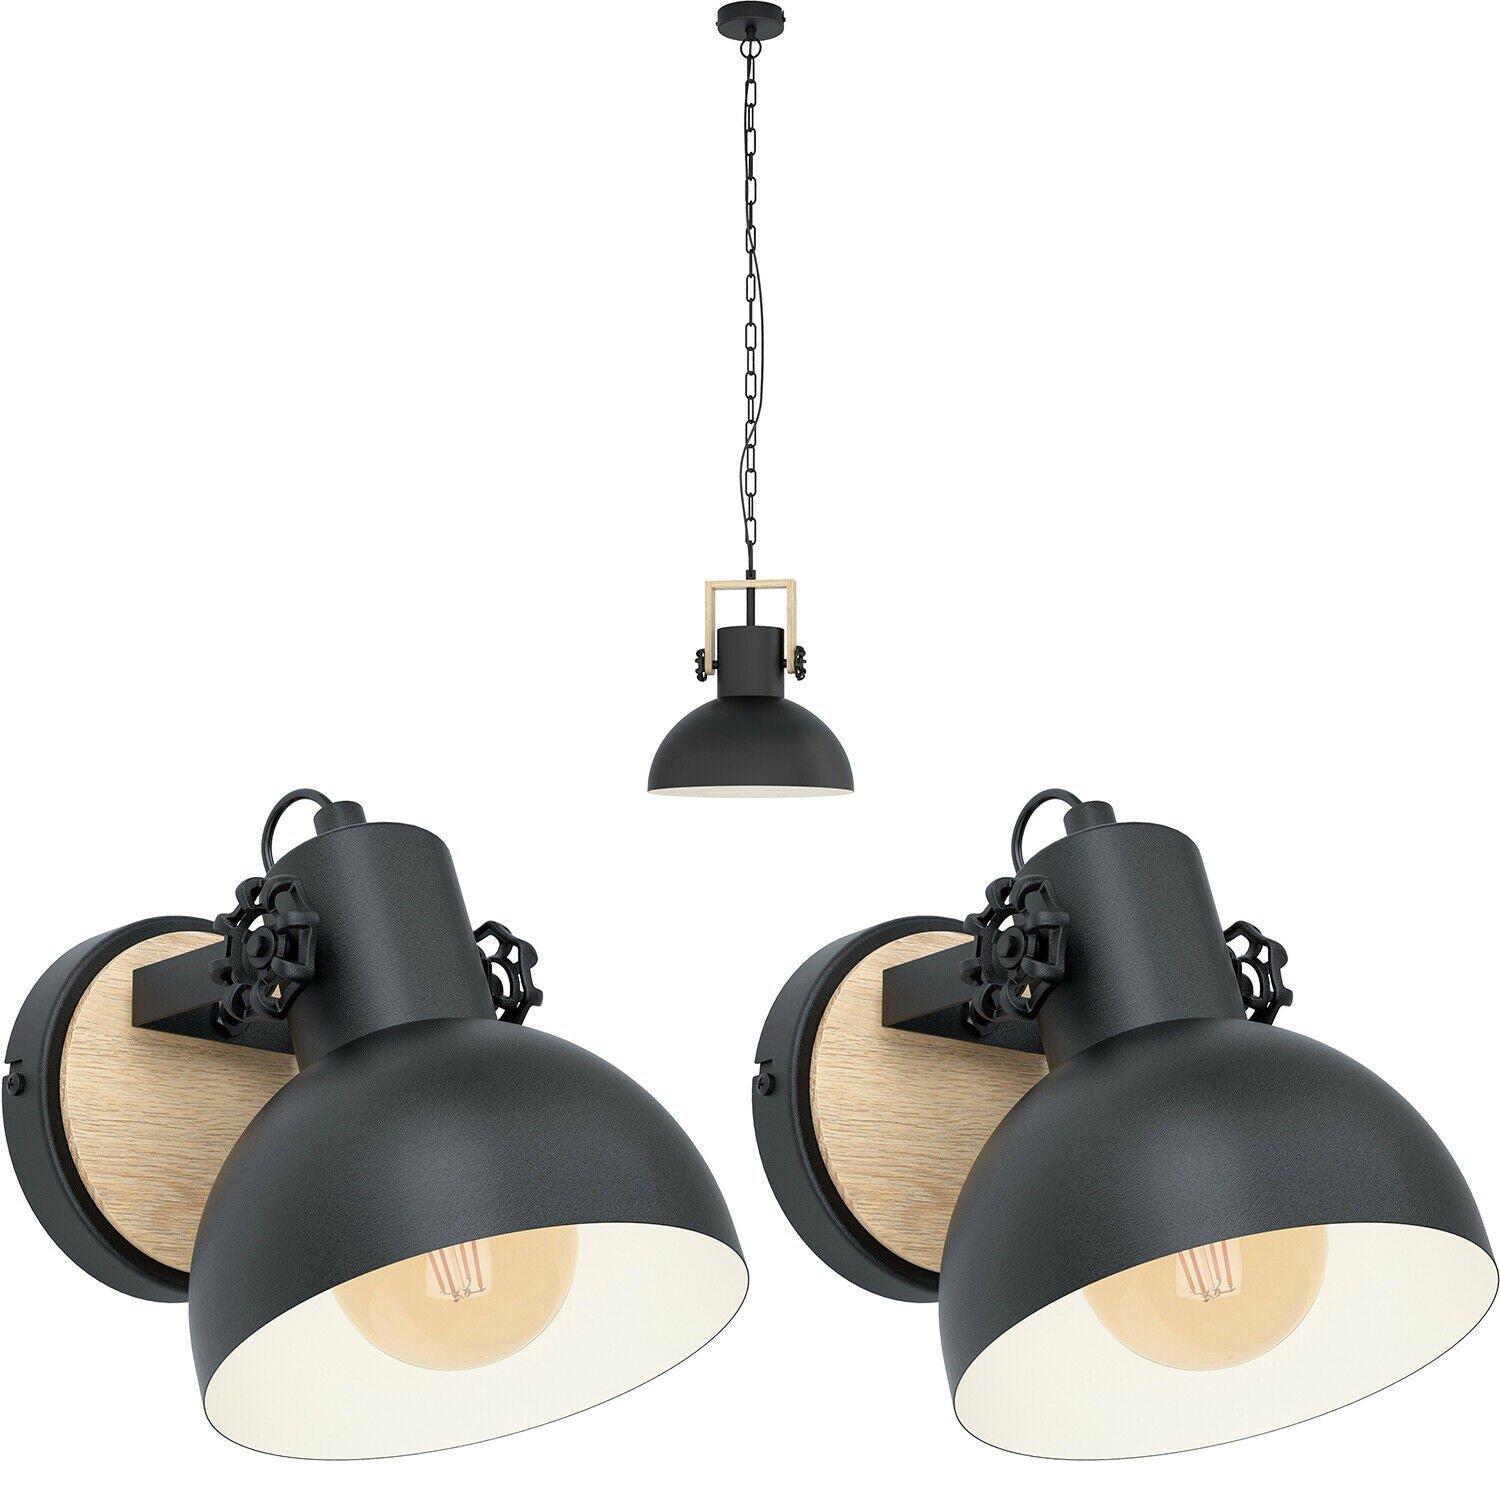 Ceiling Pendant Light & 2x Matching Wall Lights Black & Wood Industrial Shade